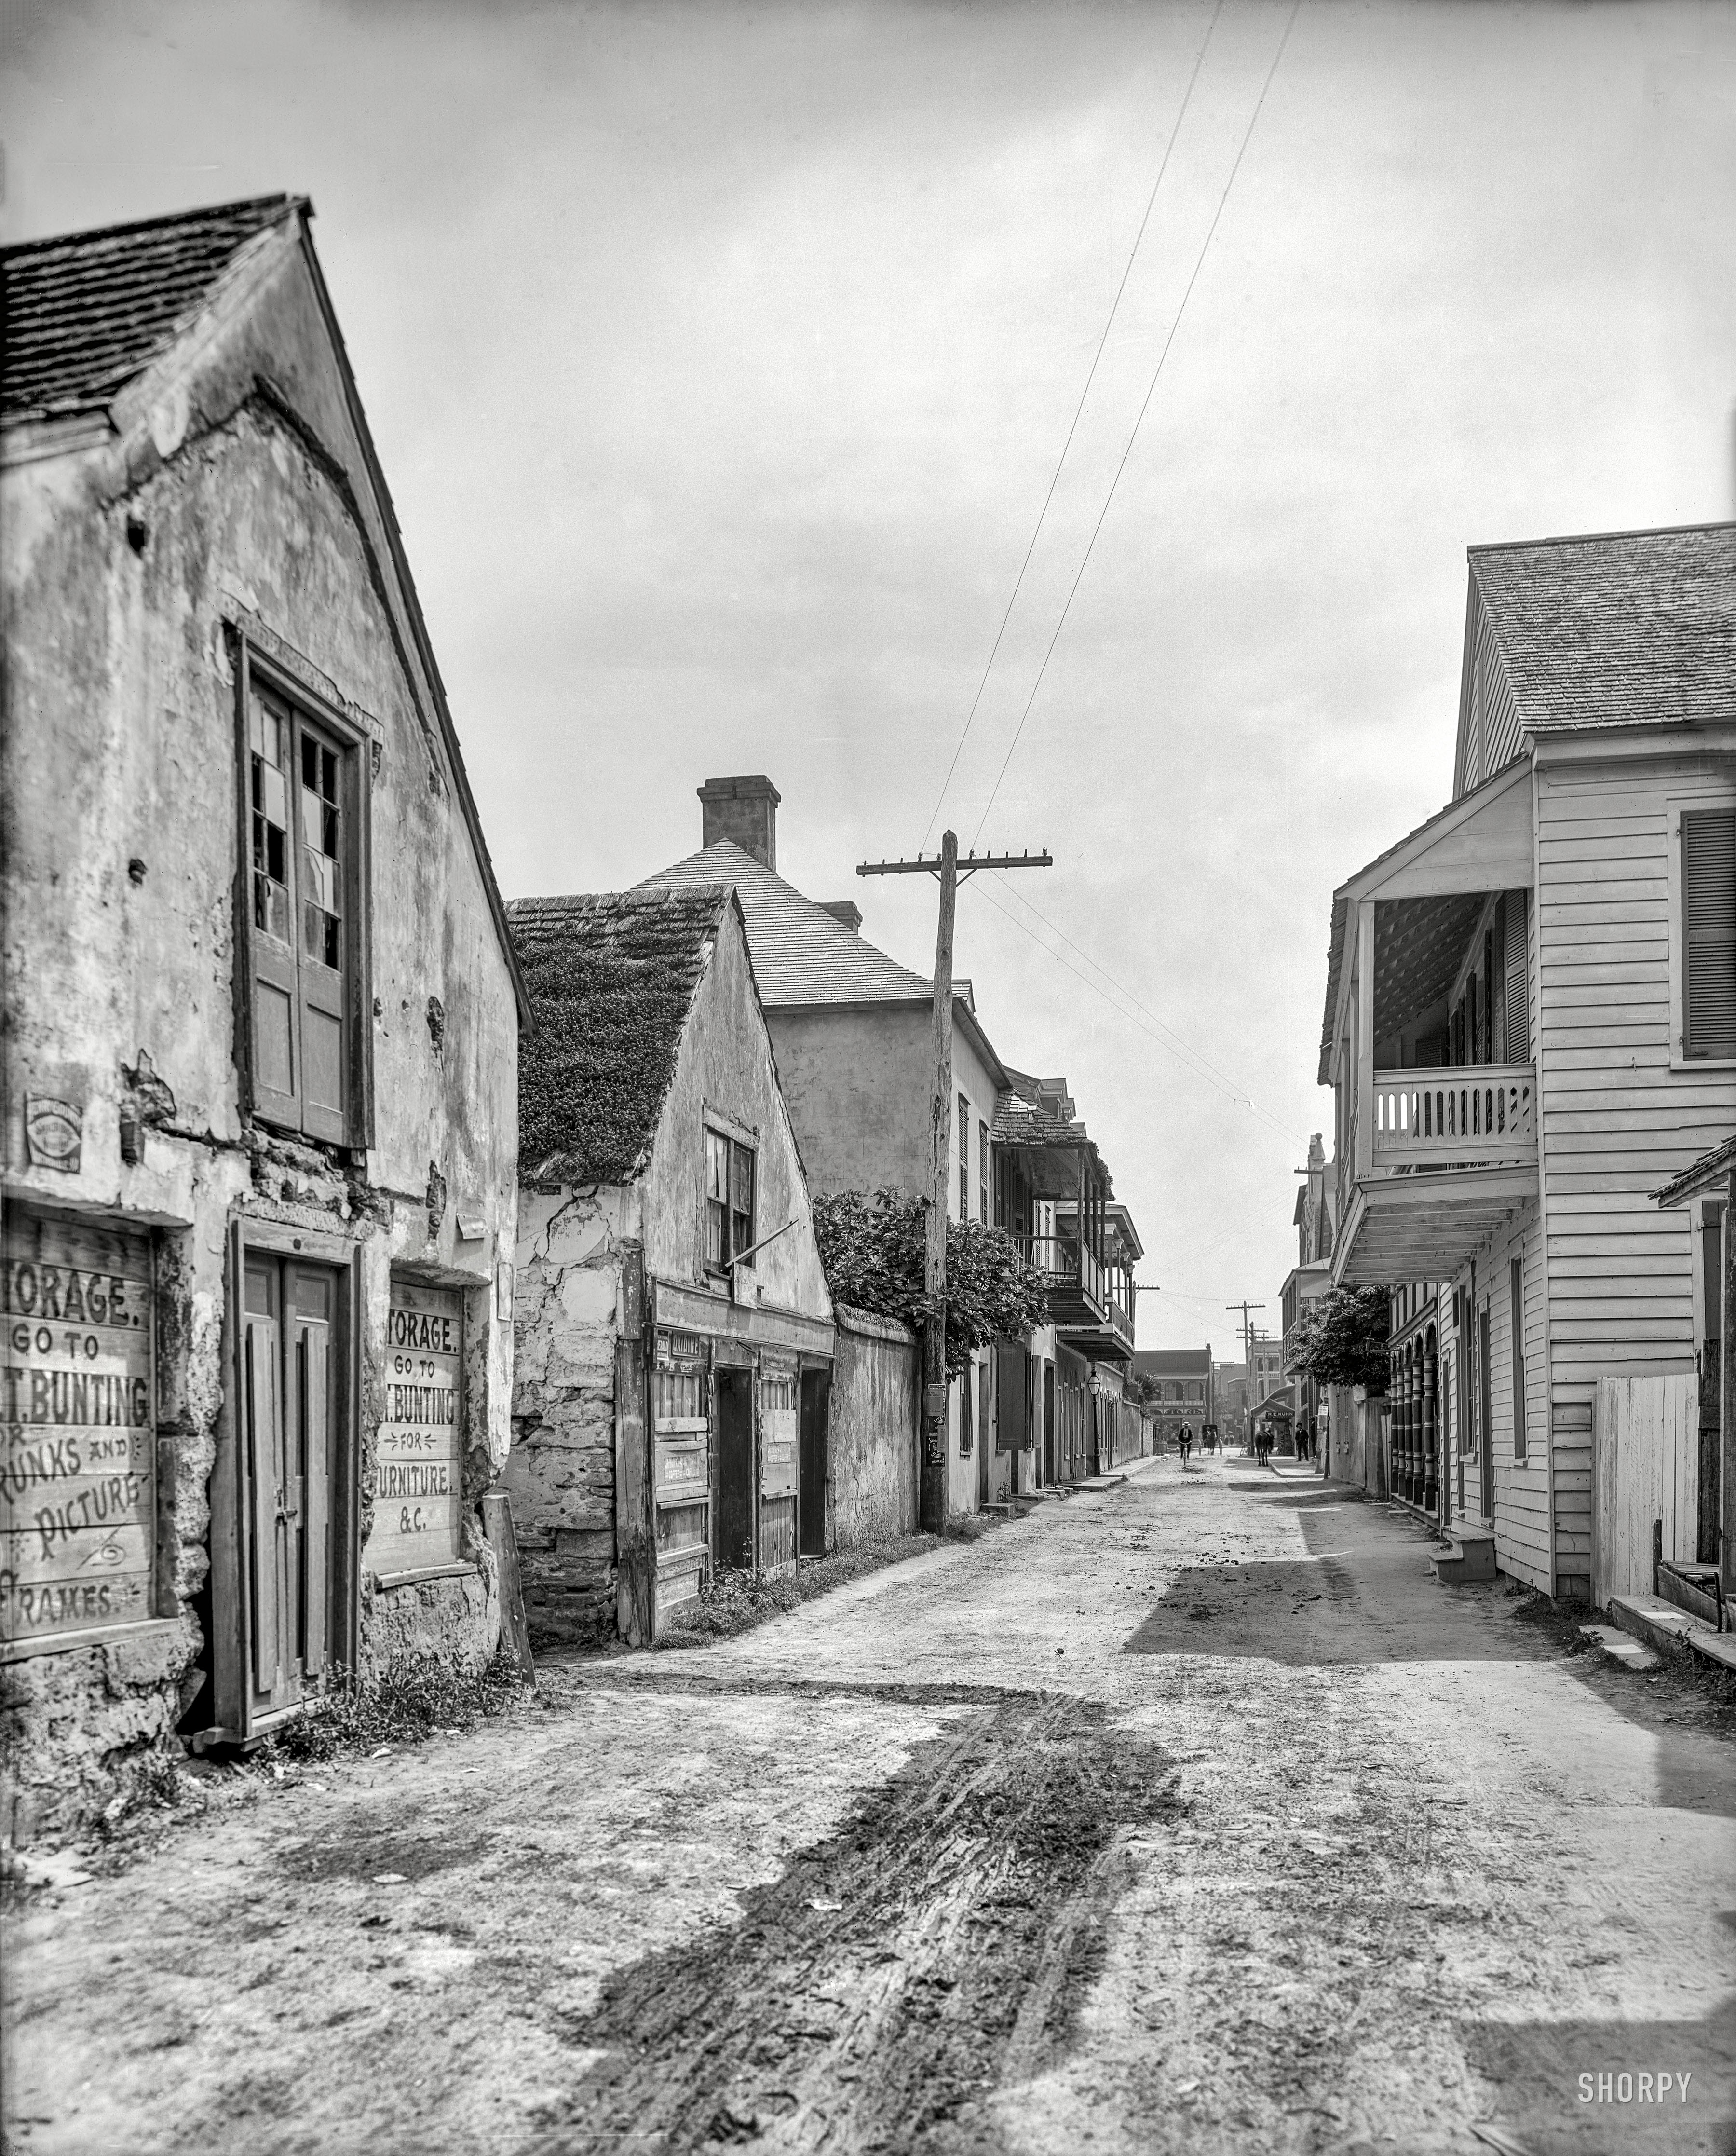 Florida circa 1910. "St. George Street, St. Augustine." 8x10 inch dry plate glass negative, Detroit Publishing Company. View full size.